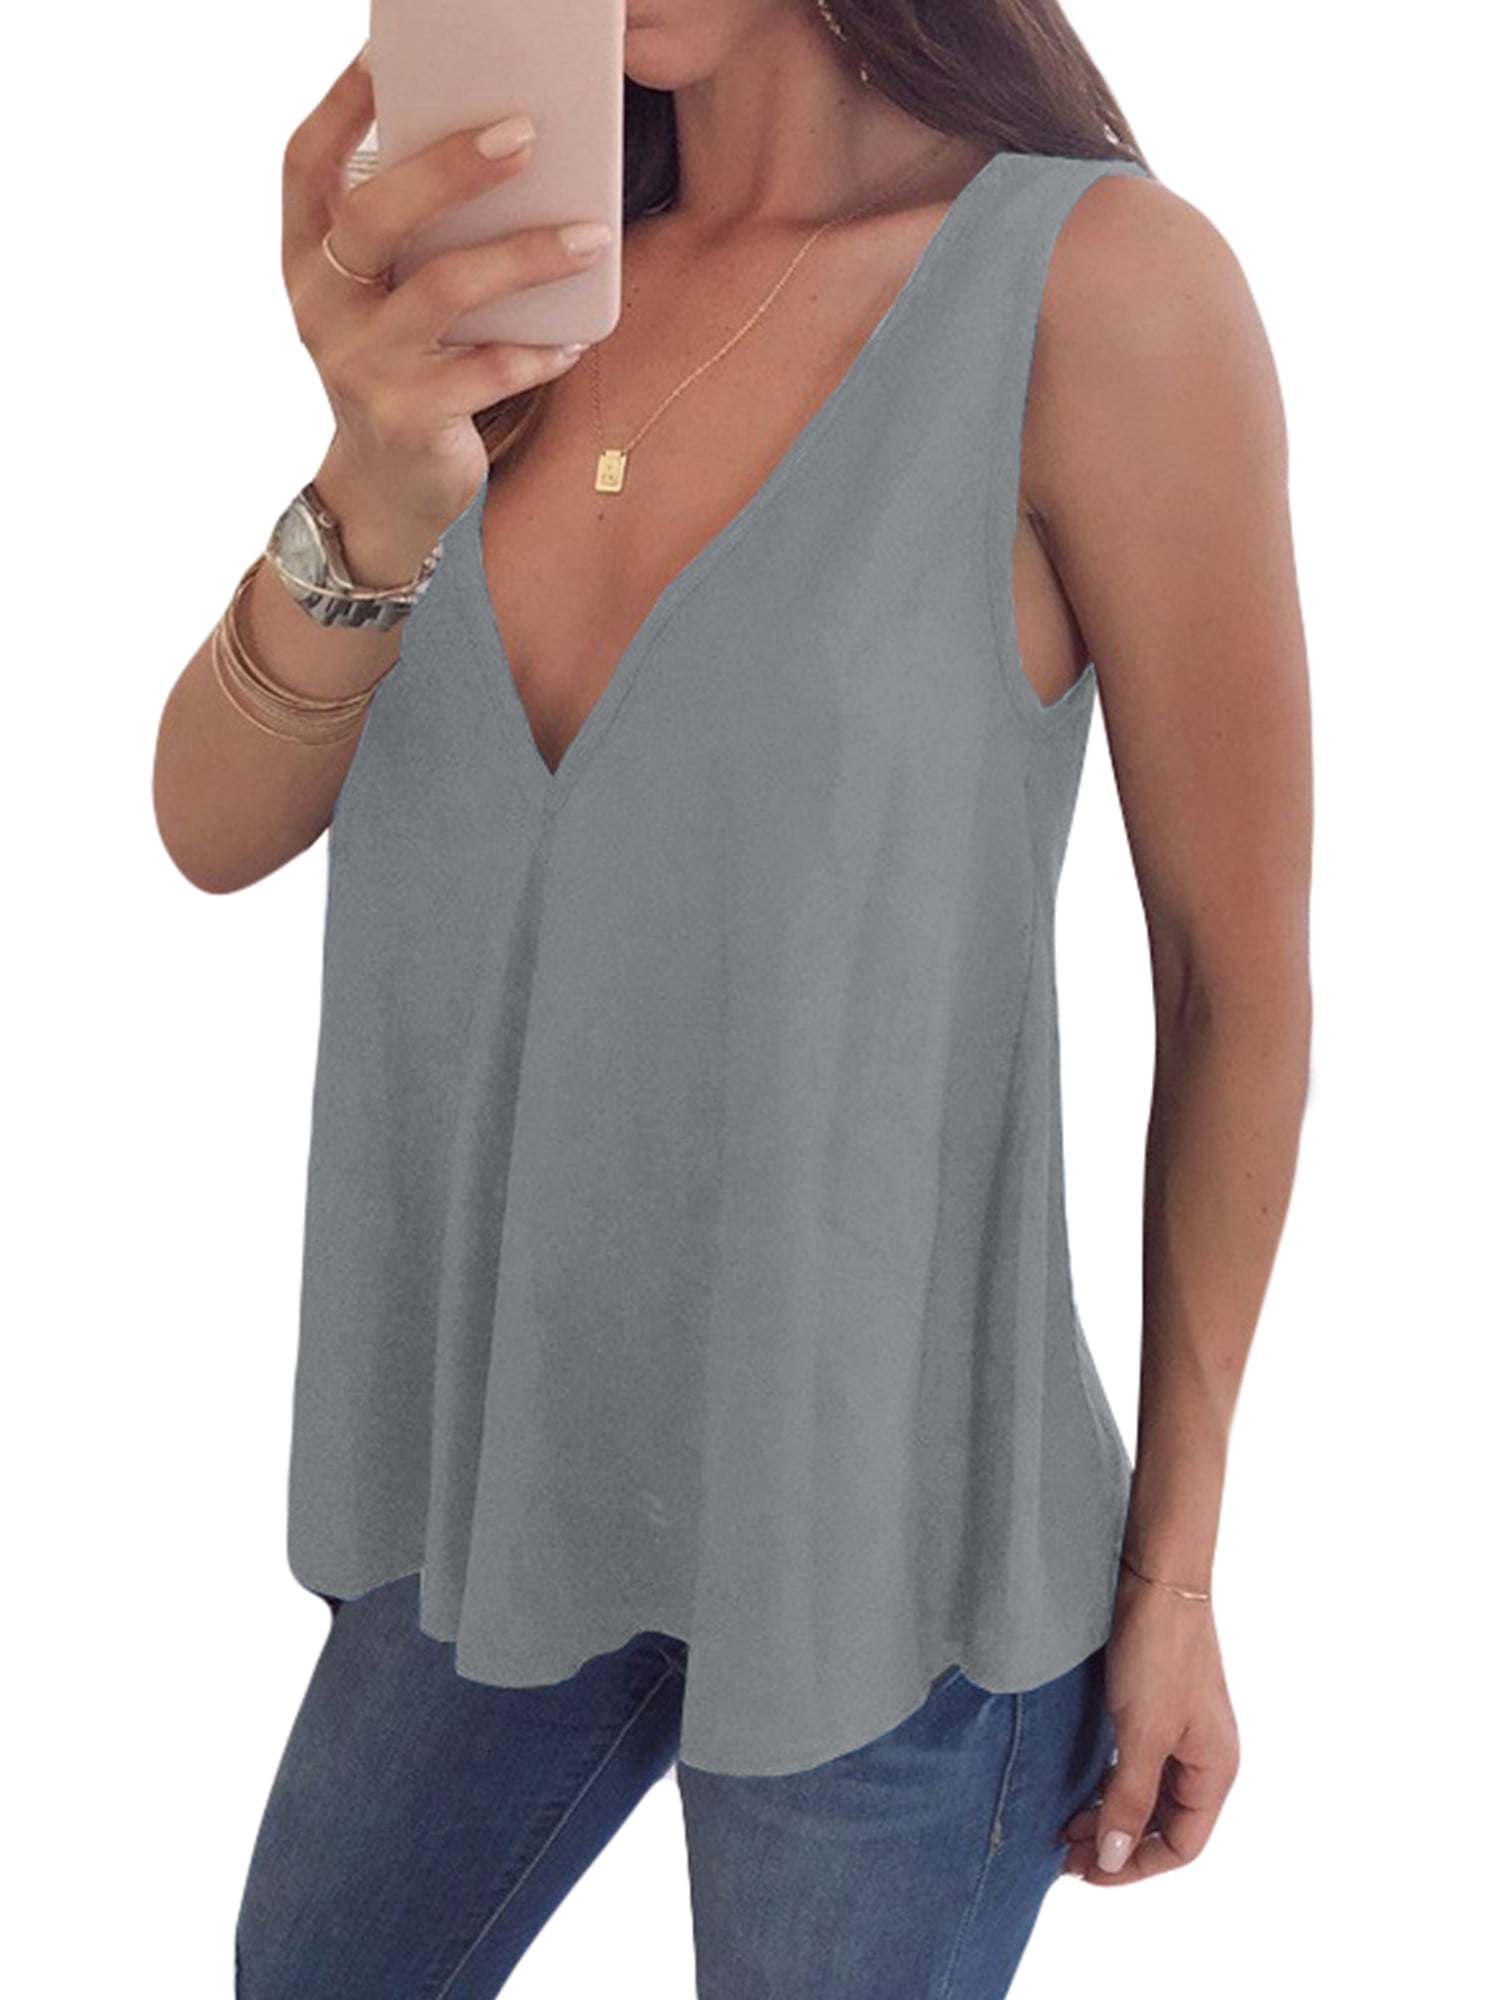 VLDO Blouse for Women Ladies Off Shoulder T-Shirt Sleeveless Round Neck Casual Tops Tee